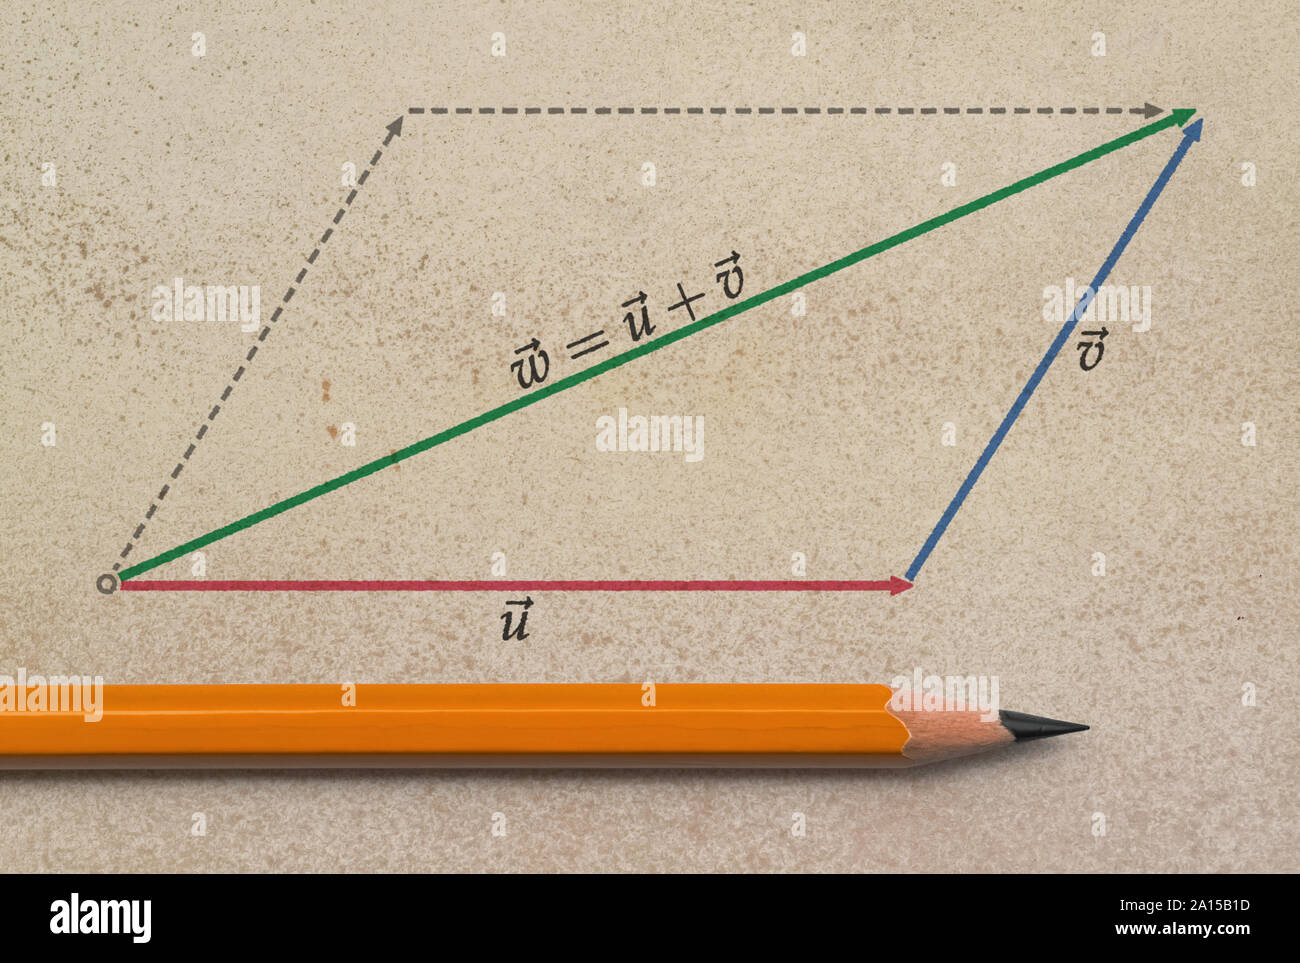 Pencil and a graphical representation of vector summation on grunge background Stock Photo